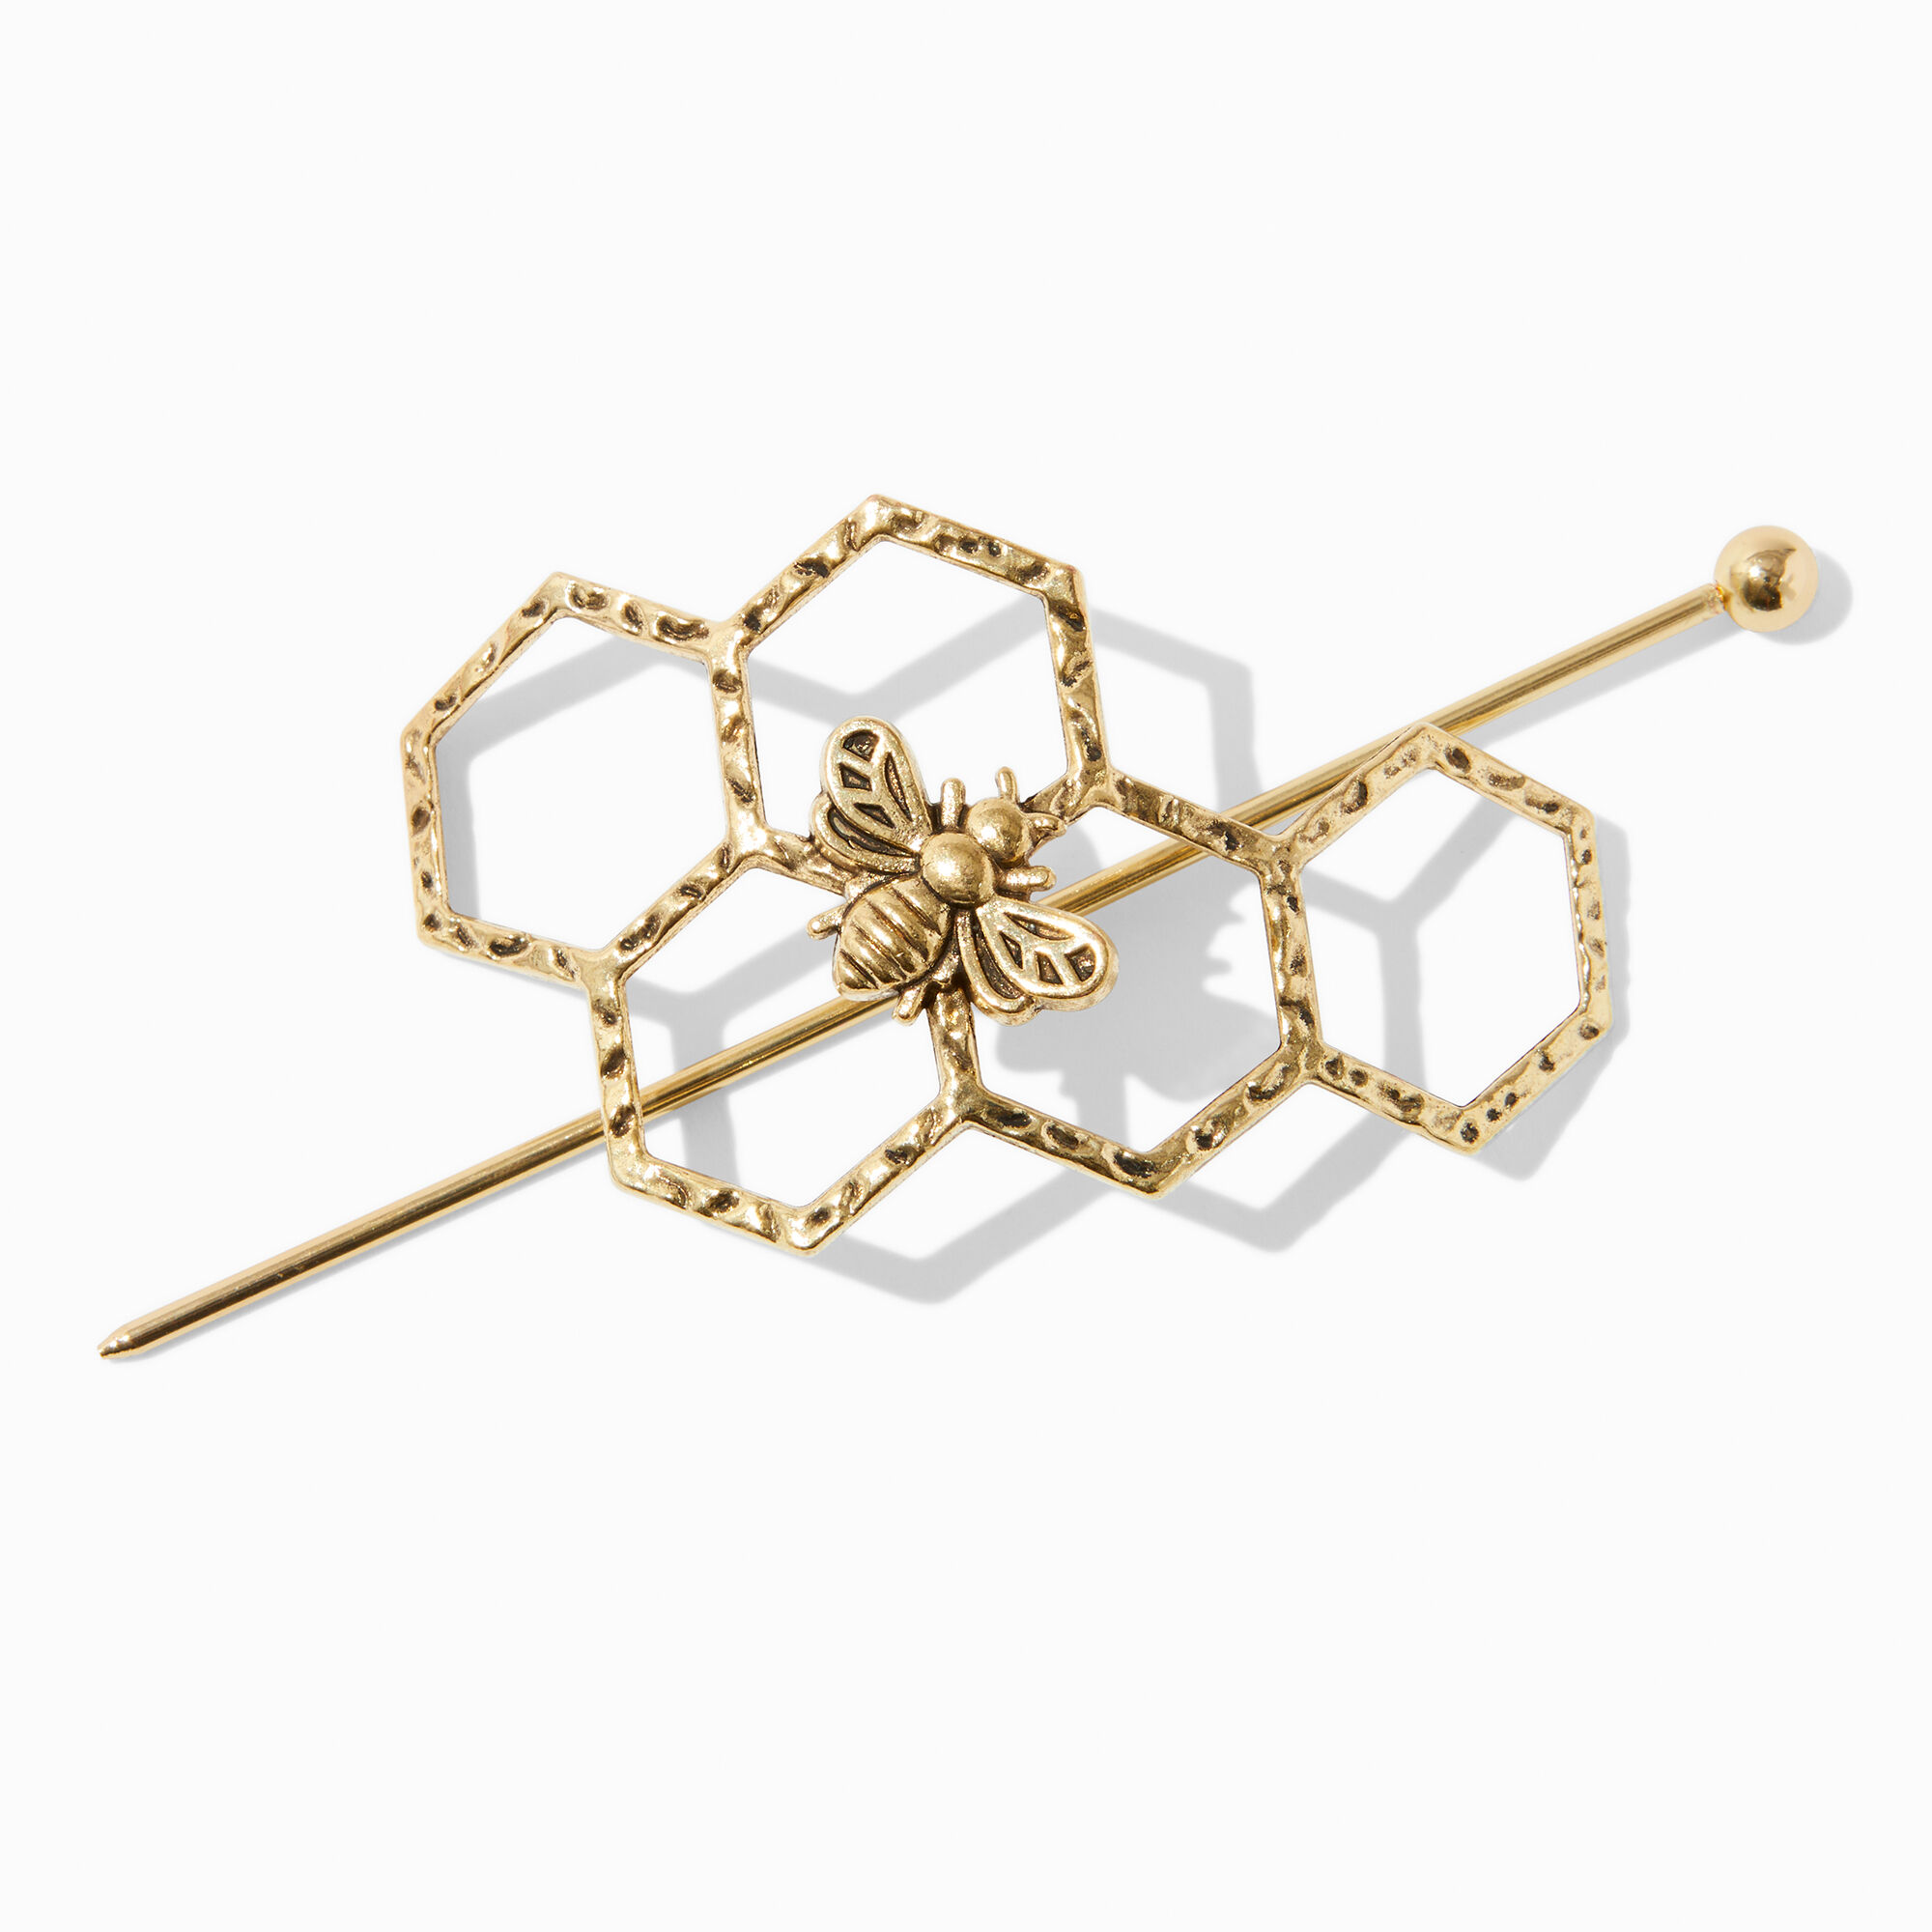 View Claires Tone Honey Bee Hair Pin Gold information